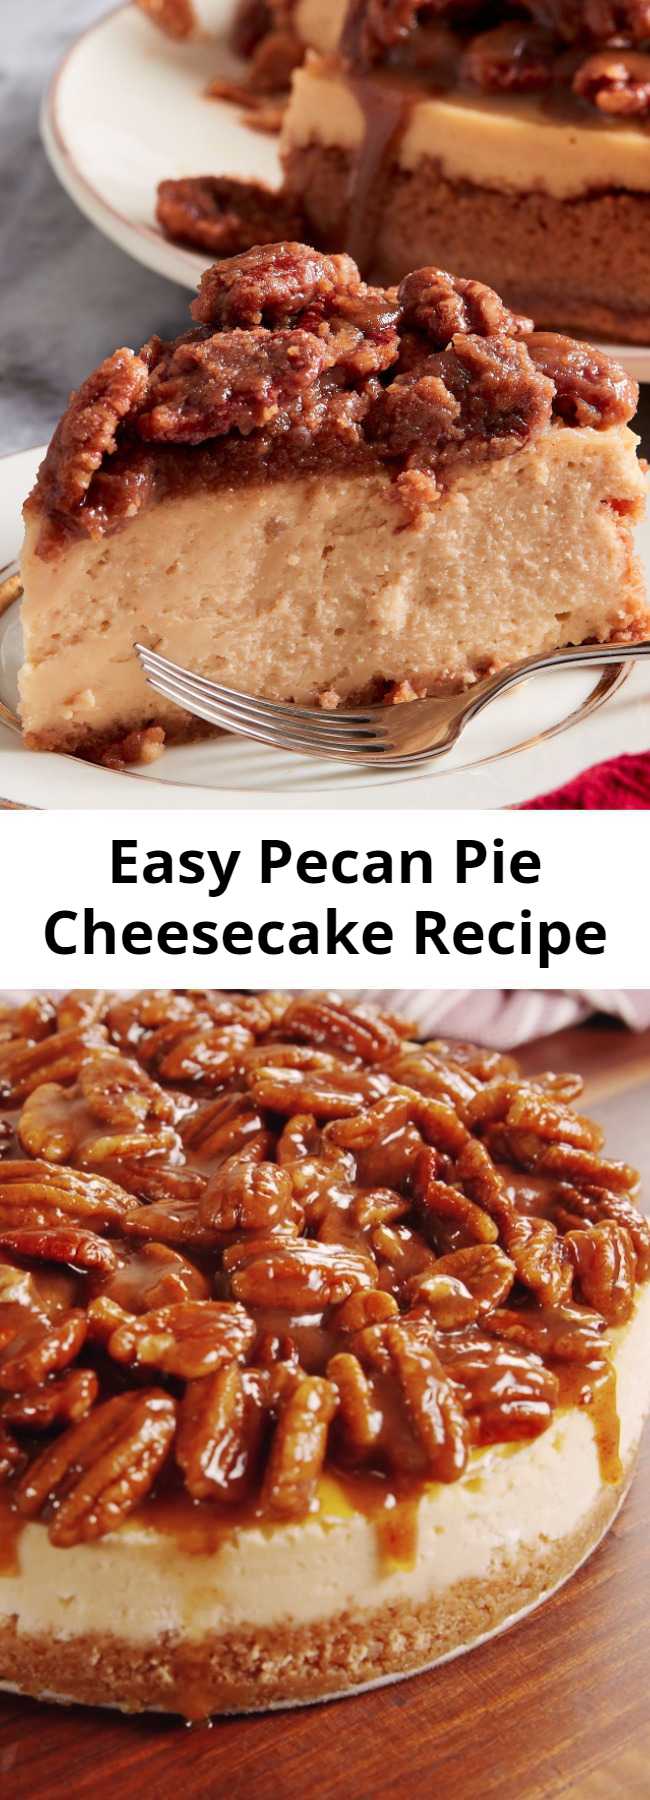 Easy Pecan Pie Cheesecake Recipe - Take your pecan pie to the next level and combine it with your favorite cheesecake. You'll have a creamy base with a sweet crunchy topping that makes this the best Thanksgiving dessert ever. You can make the topping up to an hour in advance and keep at room temperature. But don't refrigerate it or else the butter will solidify! #food #holiday #pastryporn #familydinner #comfortfood #easyrecipe #recipe #forkyeah #eatthetrend #plating